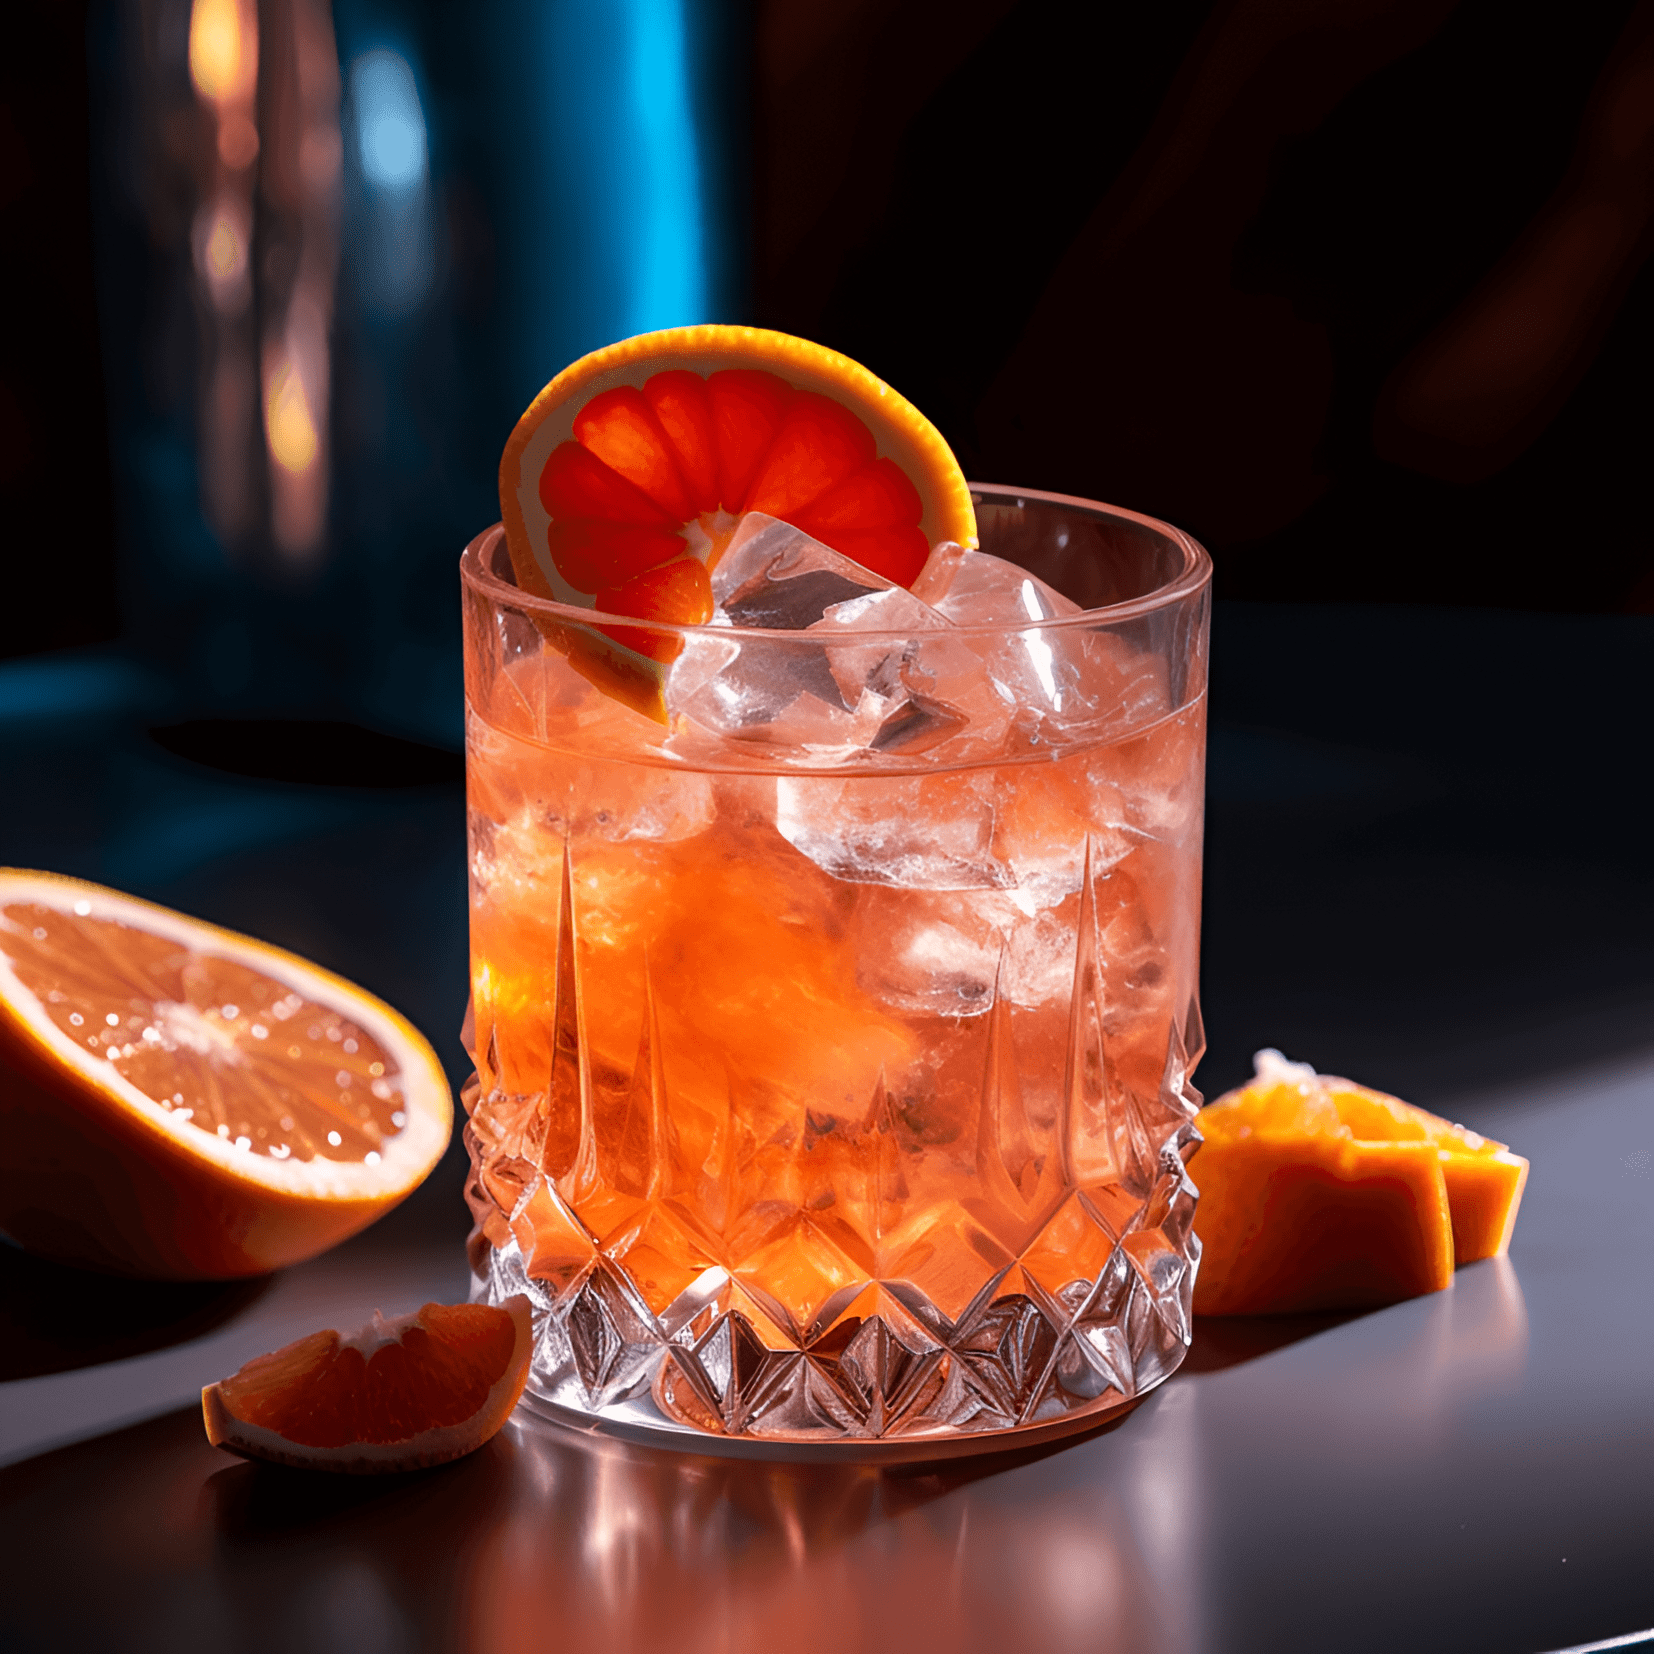 Rosita Cocktail Recipe - The Rosita cocktail has a bittersweet, slightly herbal taste with a hint of citrus. It is well-balanced, with the tequila providing a smooth, slightly smoky backbone, while the vermouth and Campari add depth and complexity.